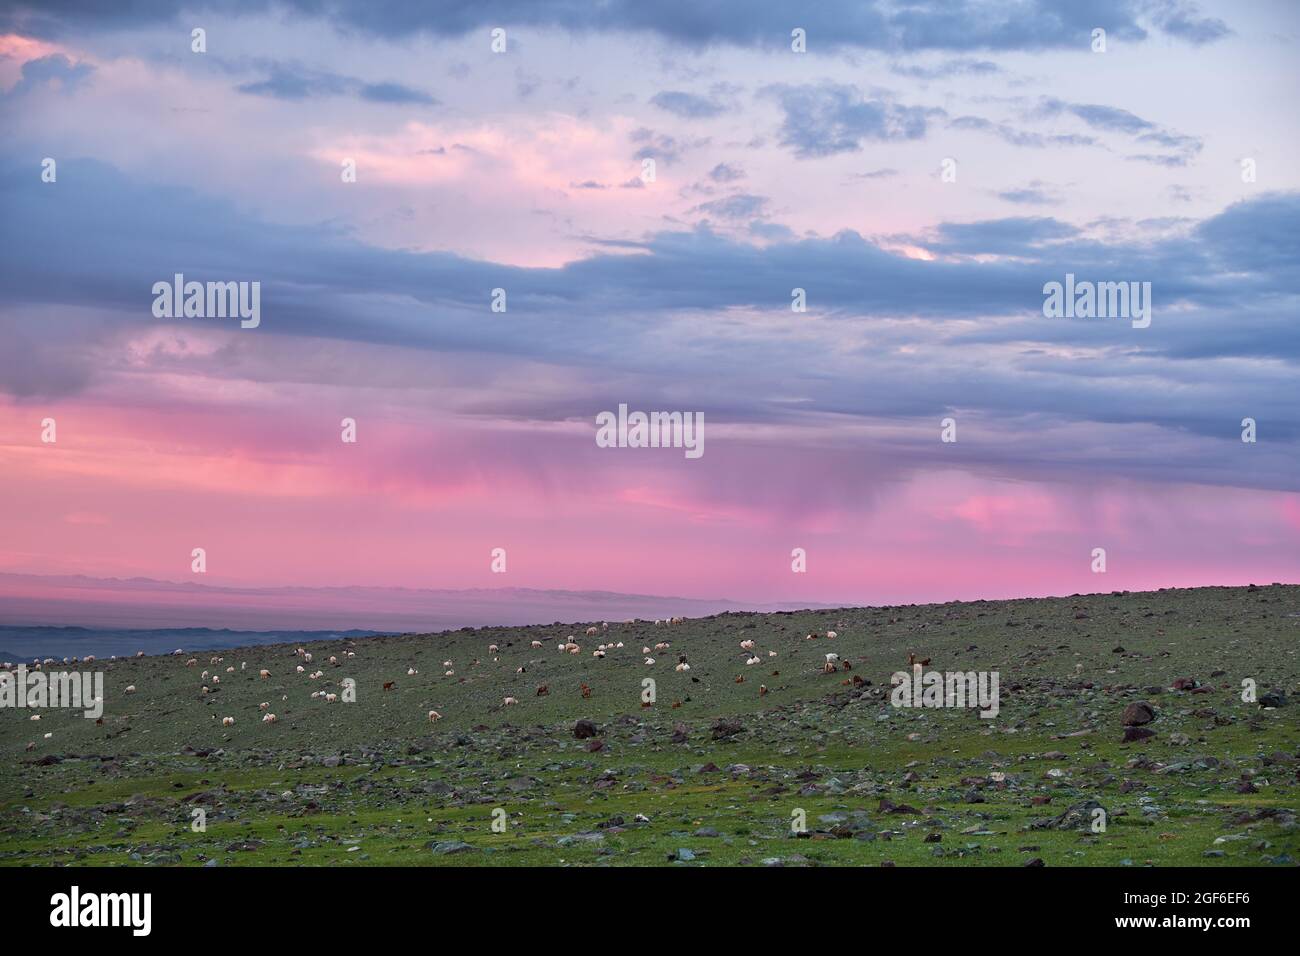 Goats and sheeps graze on mountain steppe pasture in natural mountain boundary Tsagduult, western Mongolia. Sunset time. Stock Photo